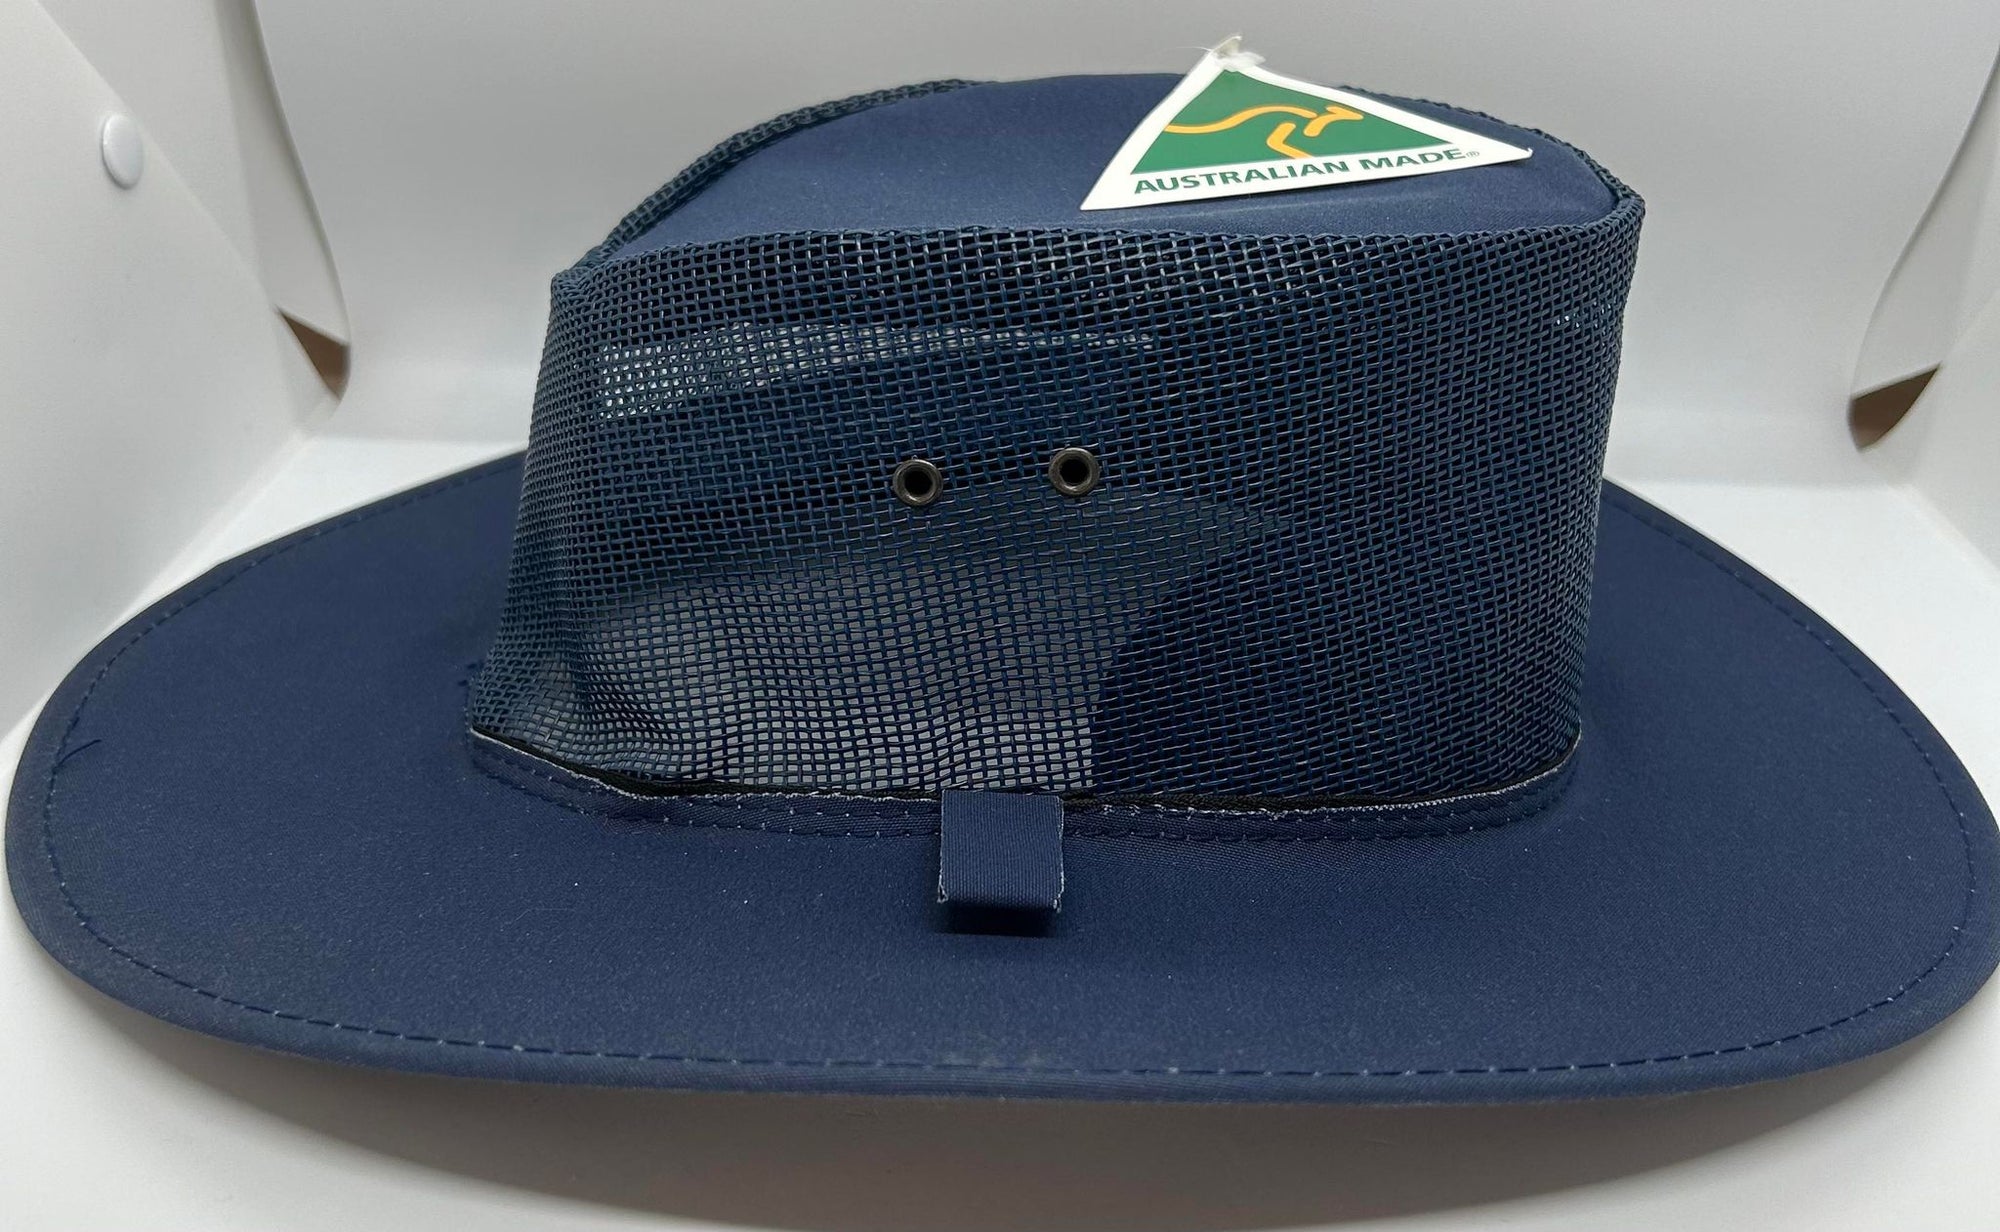 a nay blue akubra style hat with a mesh upper part